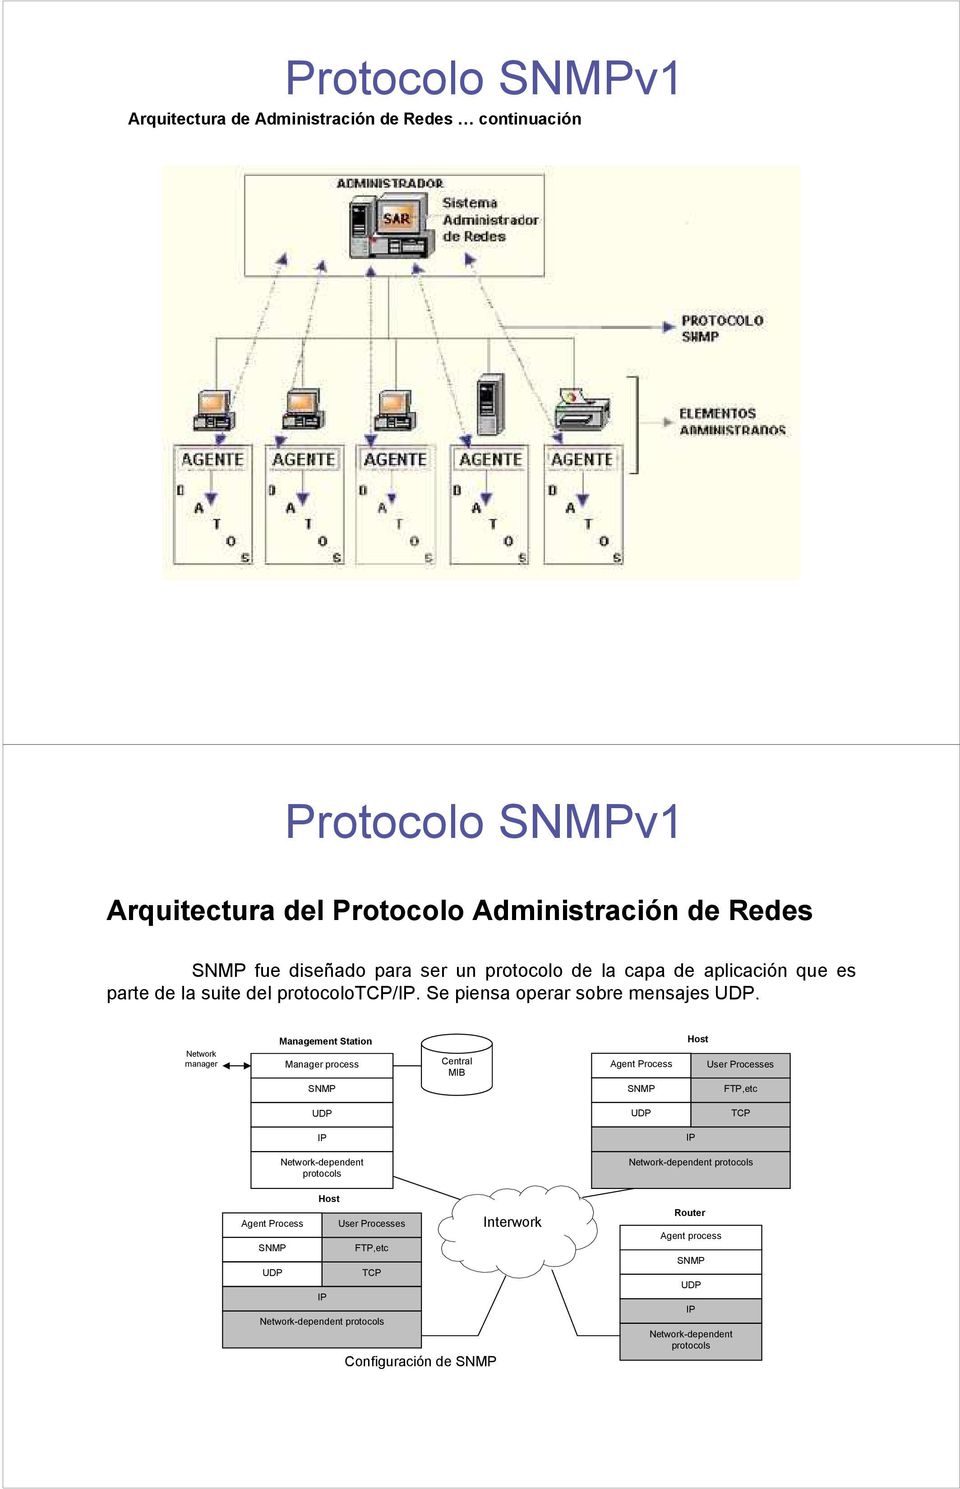 Network manager Management Station Manager process SNMP Central MIB Agent Process SNMP Host User Processes FTP,etc UDP UDP TCP IP IP Agent Process SNMP